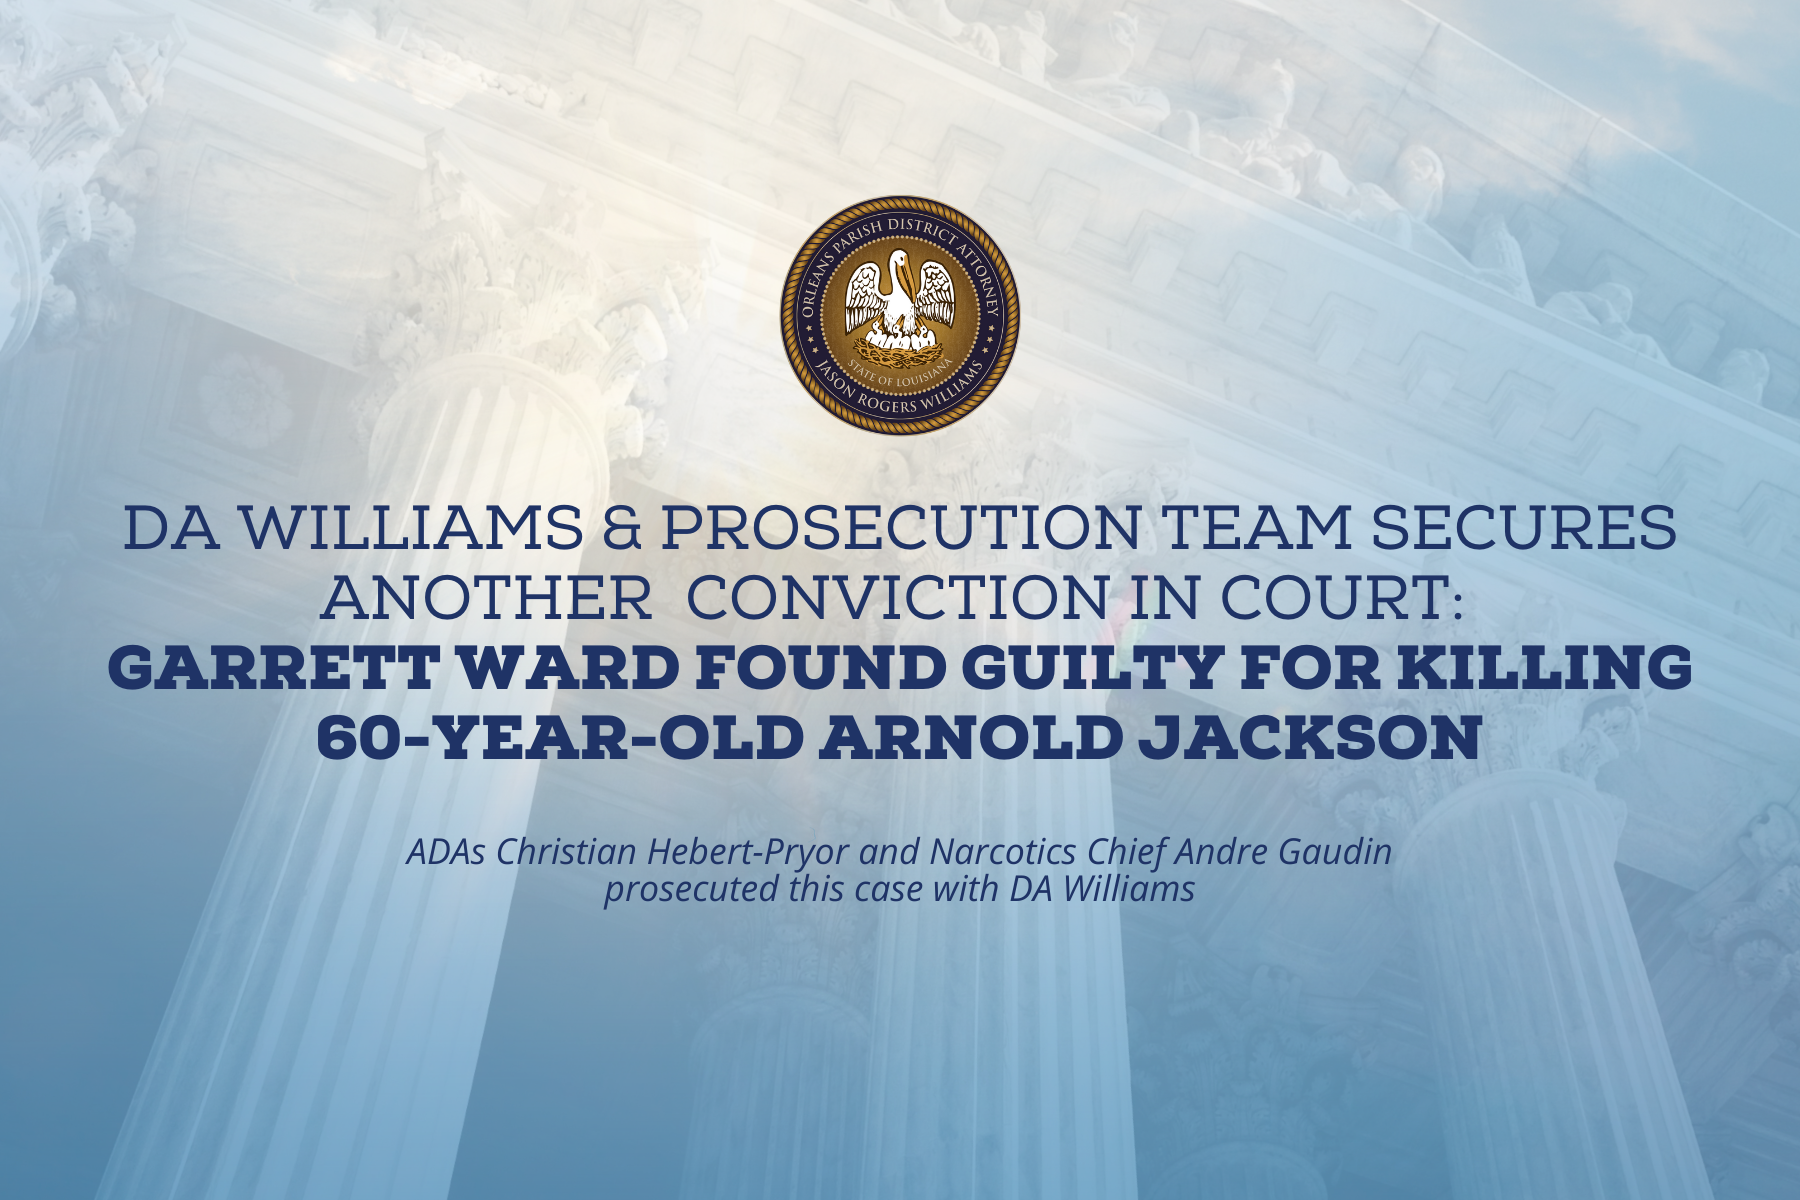 DA Williams, Prosecution Team Secures Another Conviction In Court: Garrett Ward Found Guilty For Murder Of 60-Year-Old Arnold Jackson